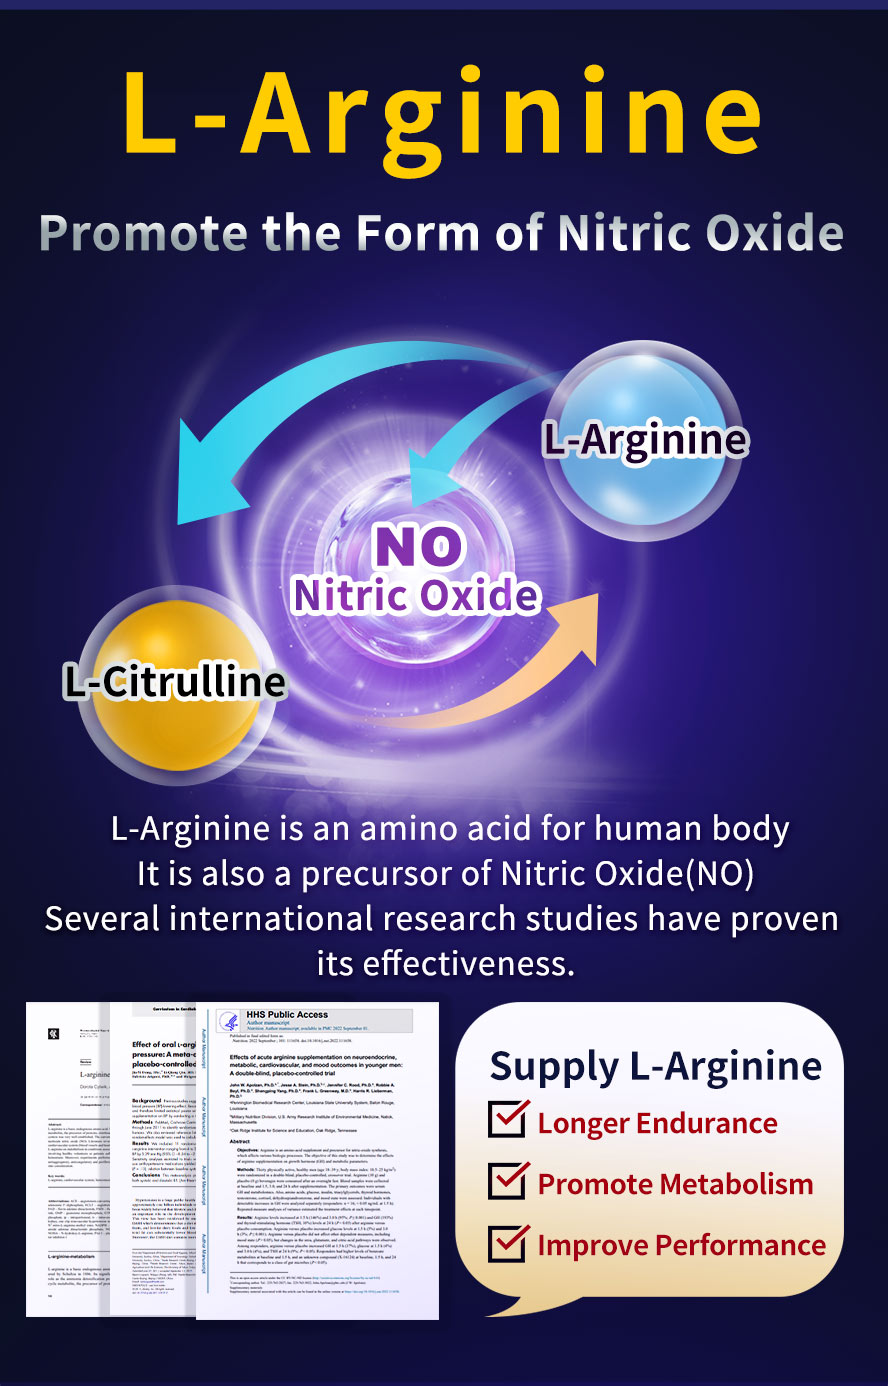 L-Arginine is an essential amino acids to human body which helps to produce nitric oxide for longer endurance, promote metabolism, and improve performance.